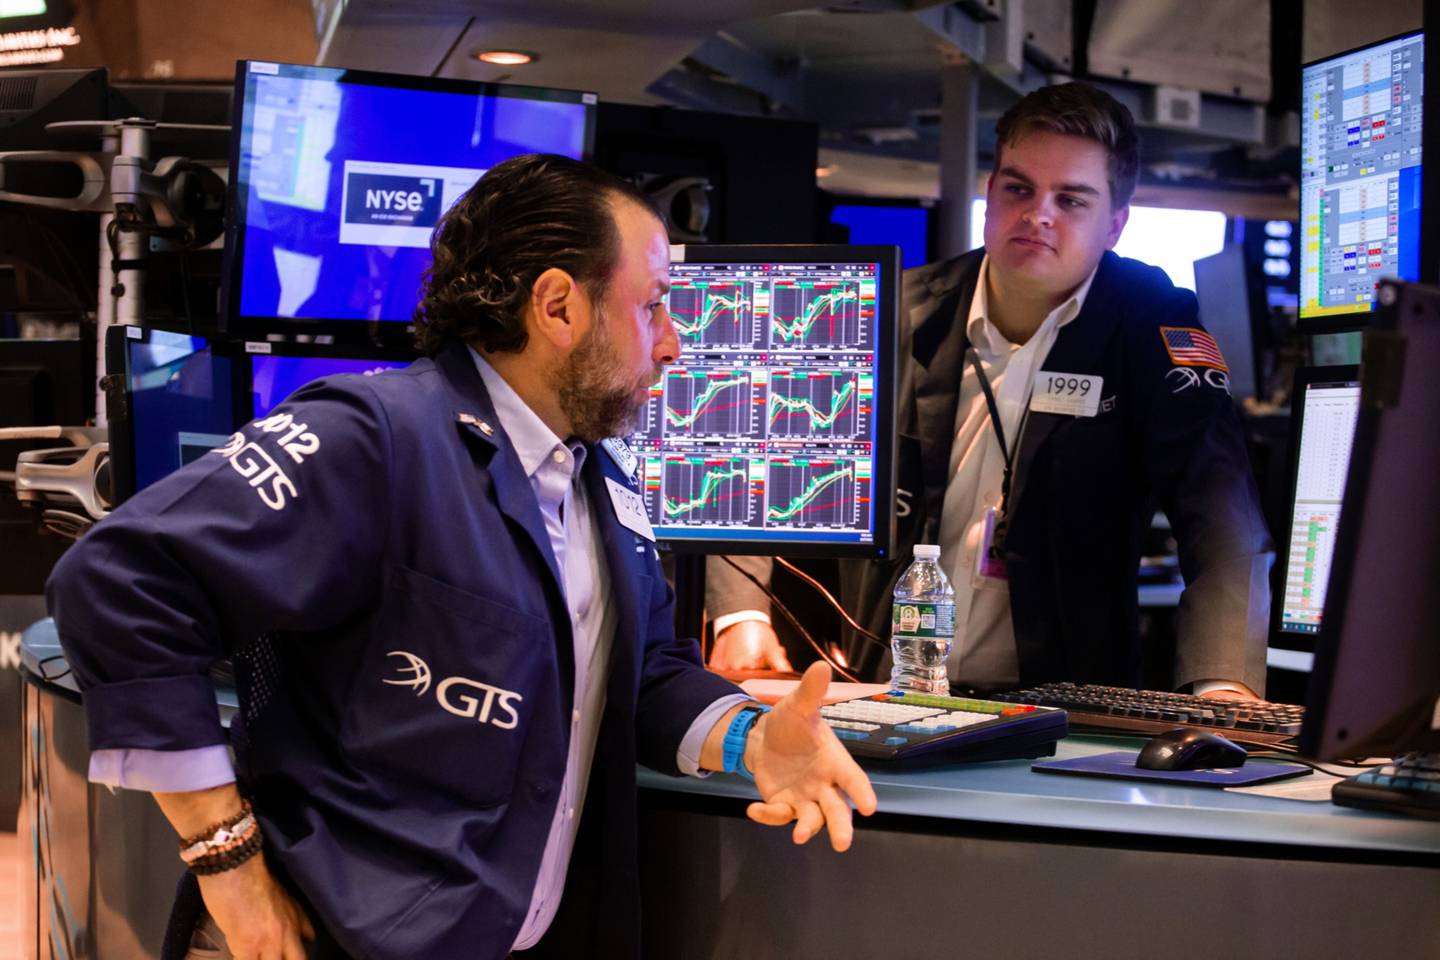 Traders on the floor of the New York Stock Exchange (NYSE) in New York, US. Photographer: Michael Nagle/Bloomberg